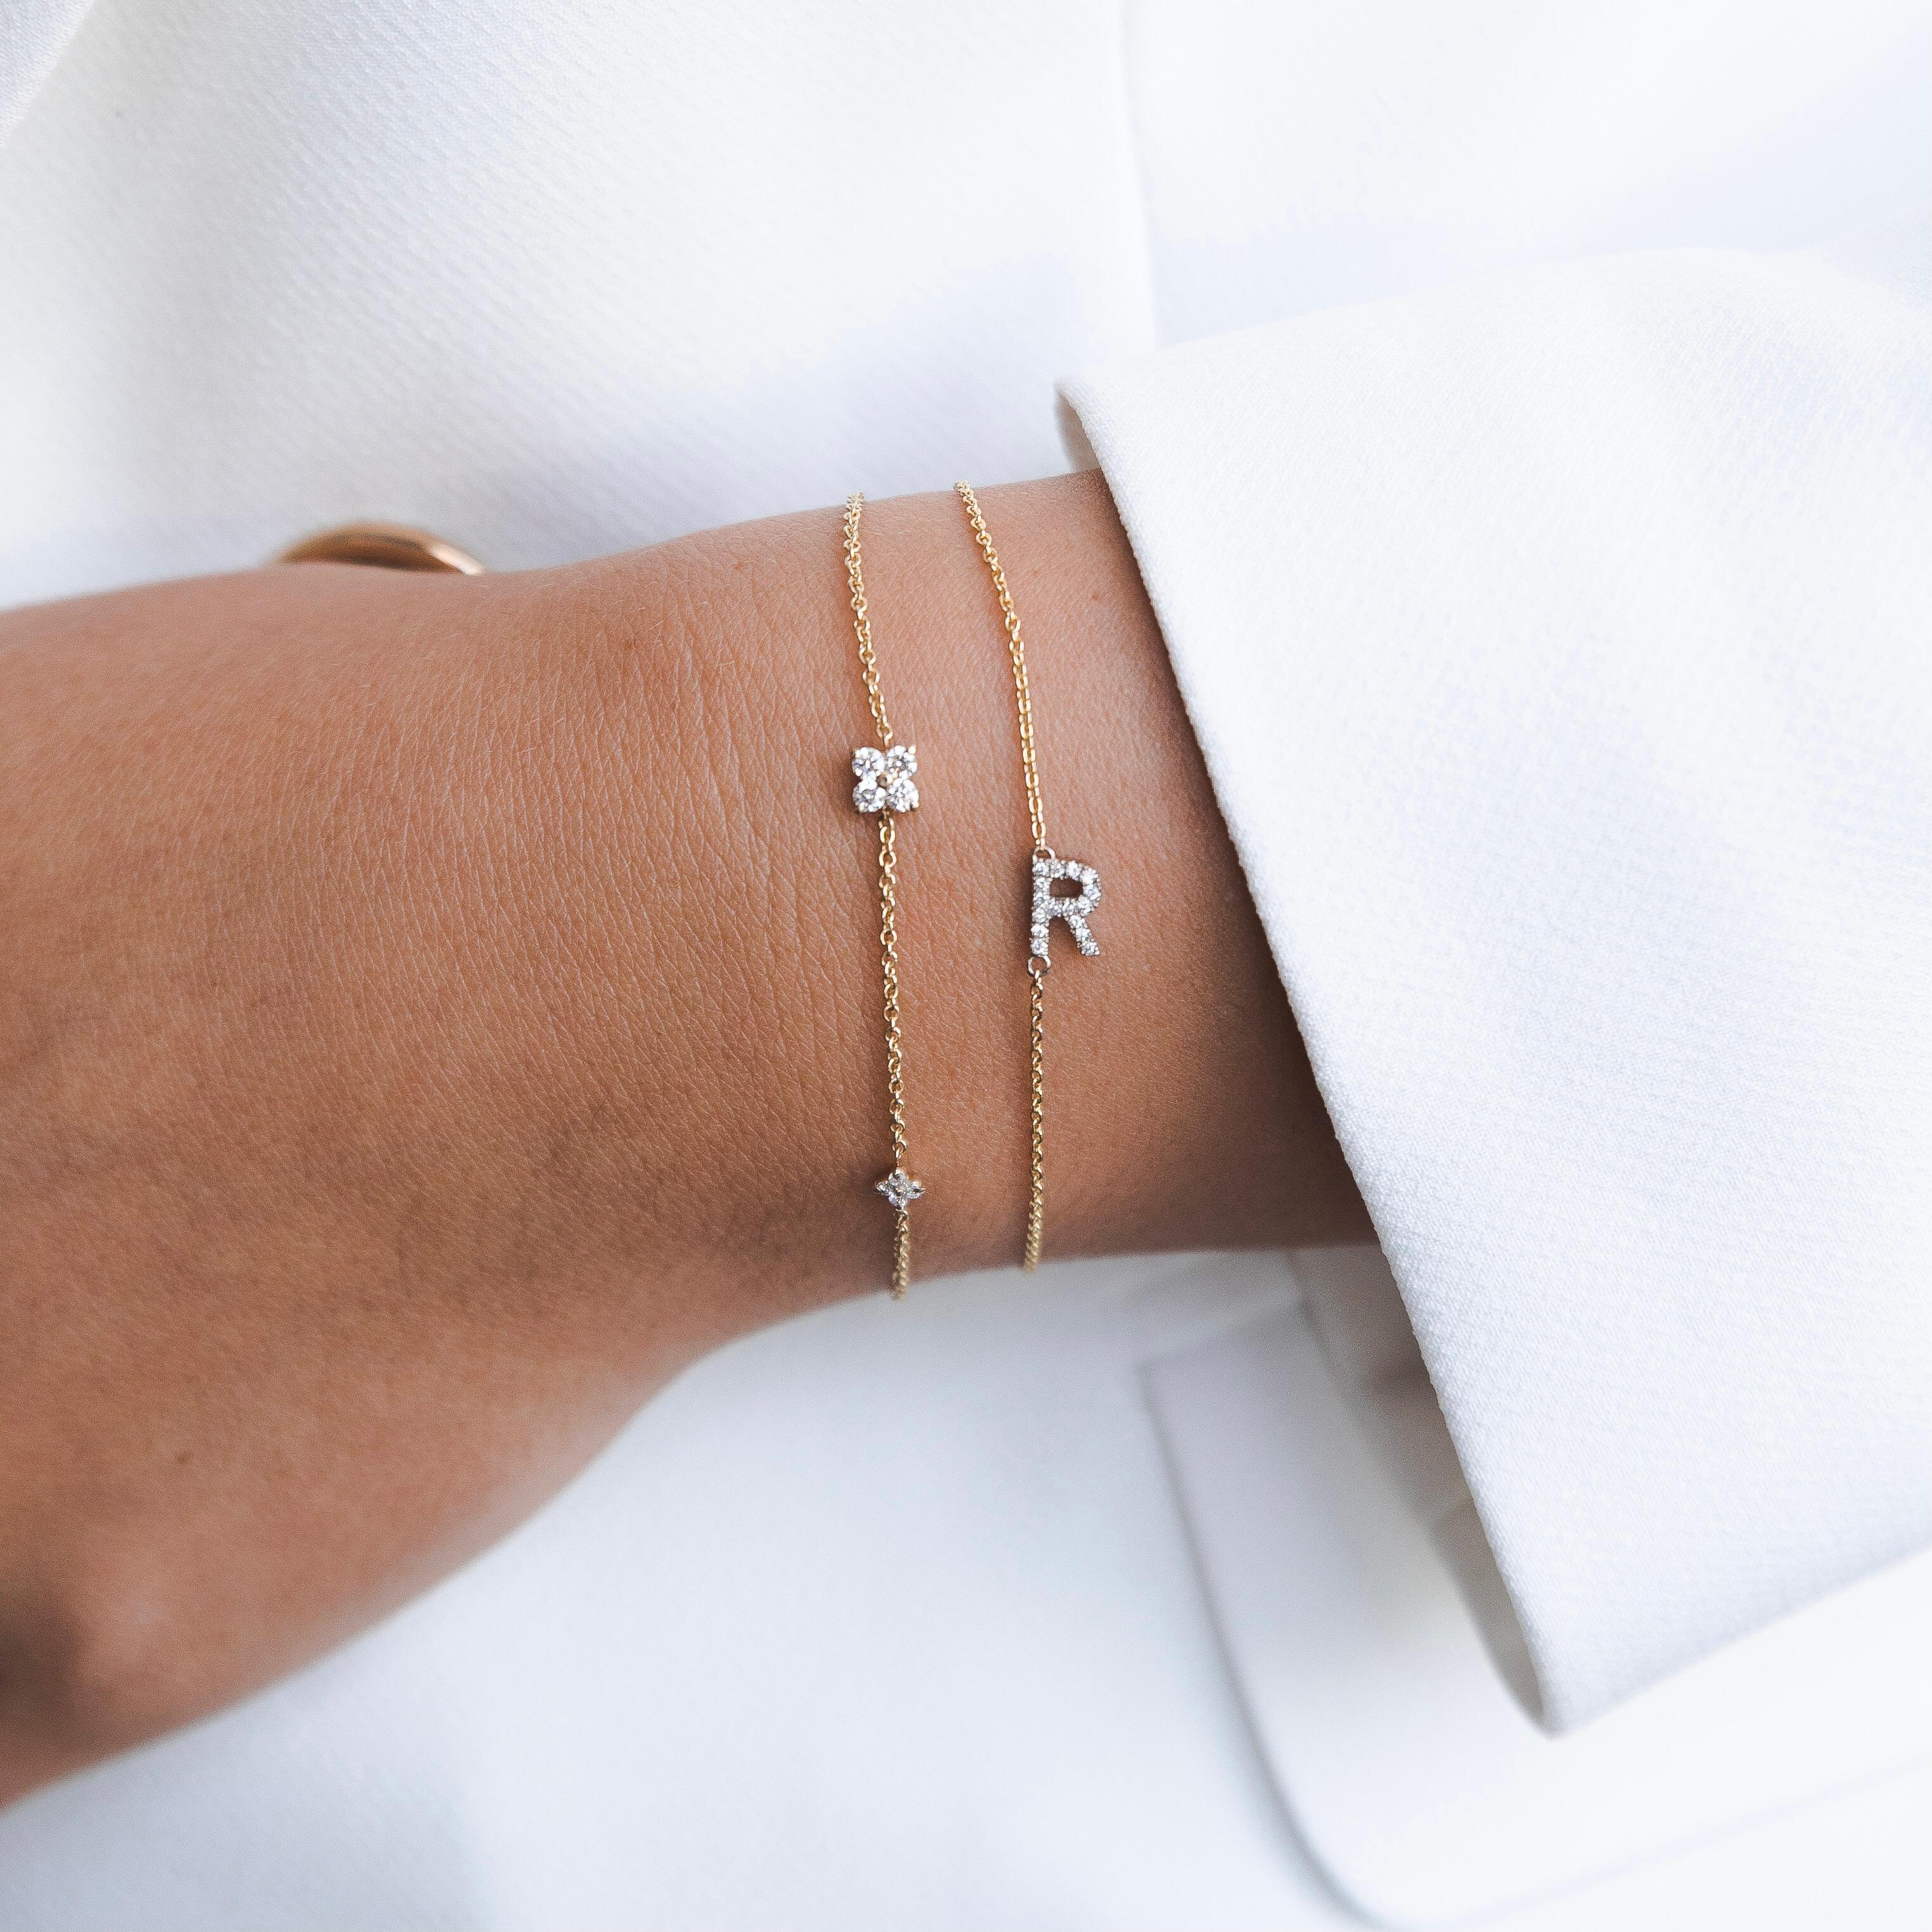 Personalized Genuine Diamond Asymmetrical Letter Bracelet in 14k Yellow Gold, Shlomit Rogel

Make it personal!
Beautifully handcrafted in 14k yellow gold, this chain bracelet features an asymmetrical initial of your choice embellished with genuine